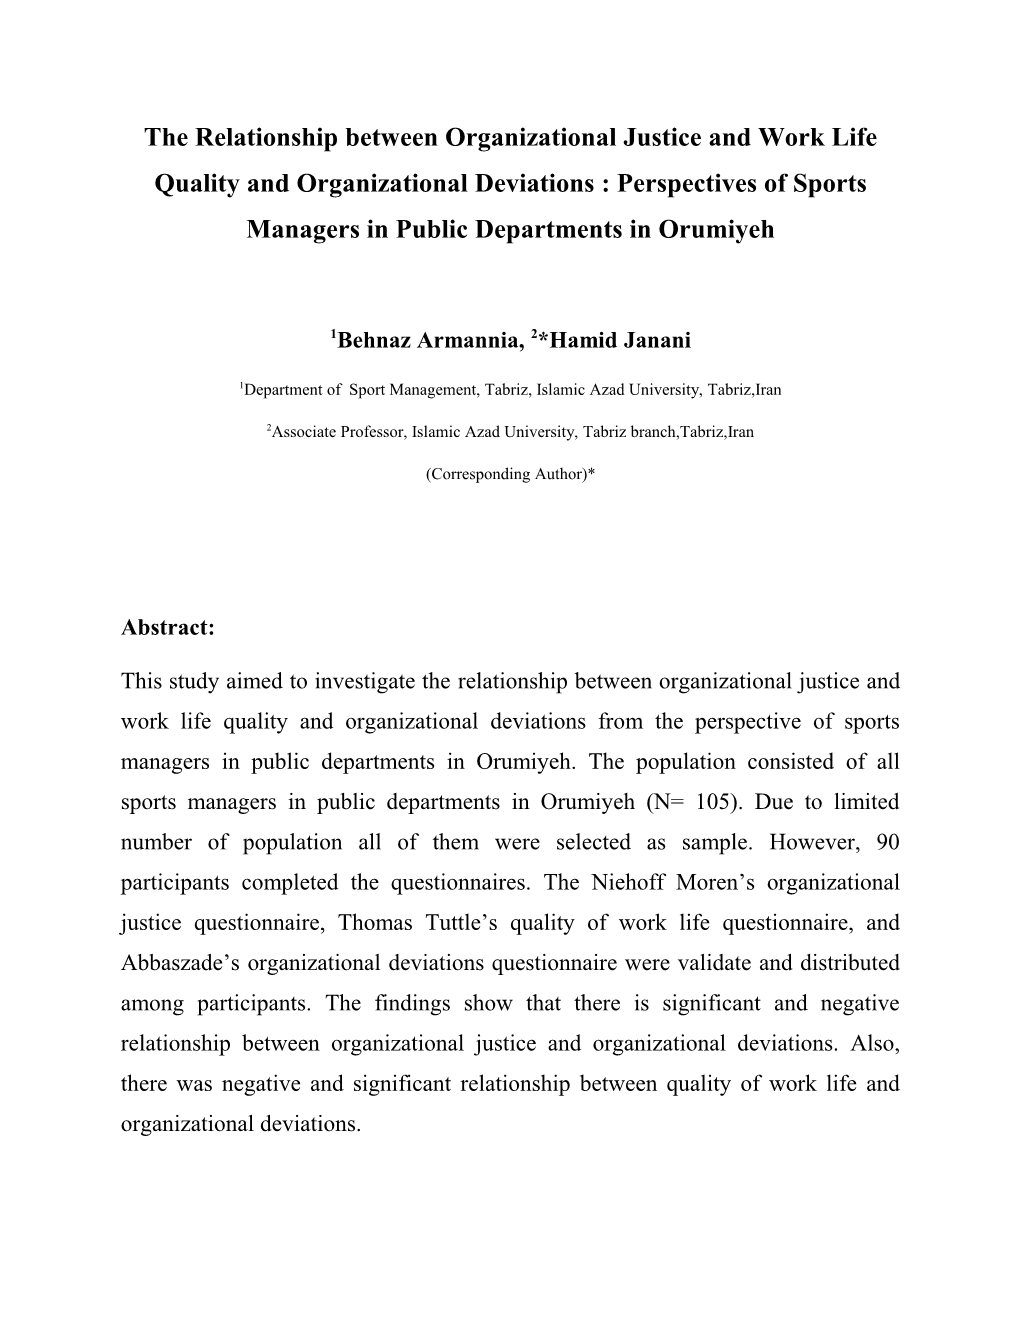 The Relationship Between Organizational Justice and Work Life Quality and Organizational